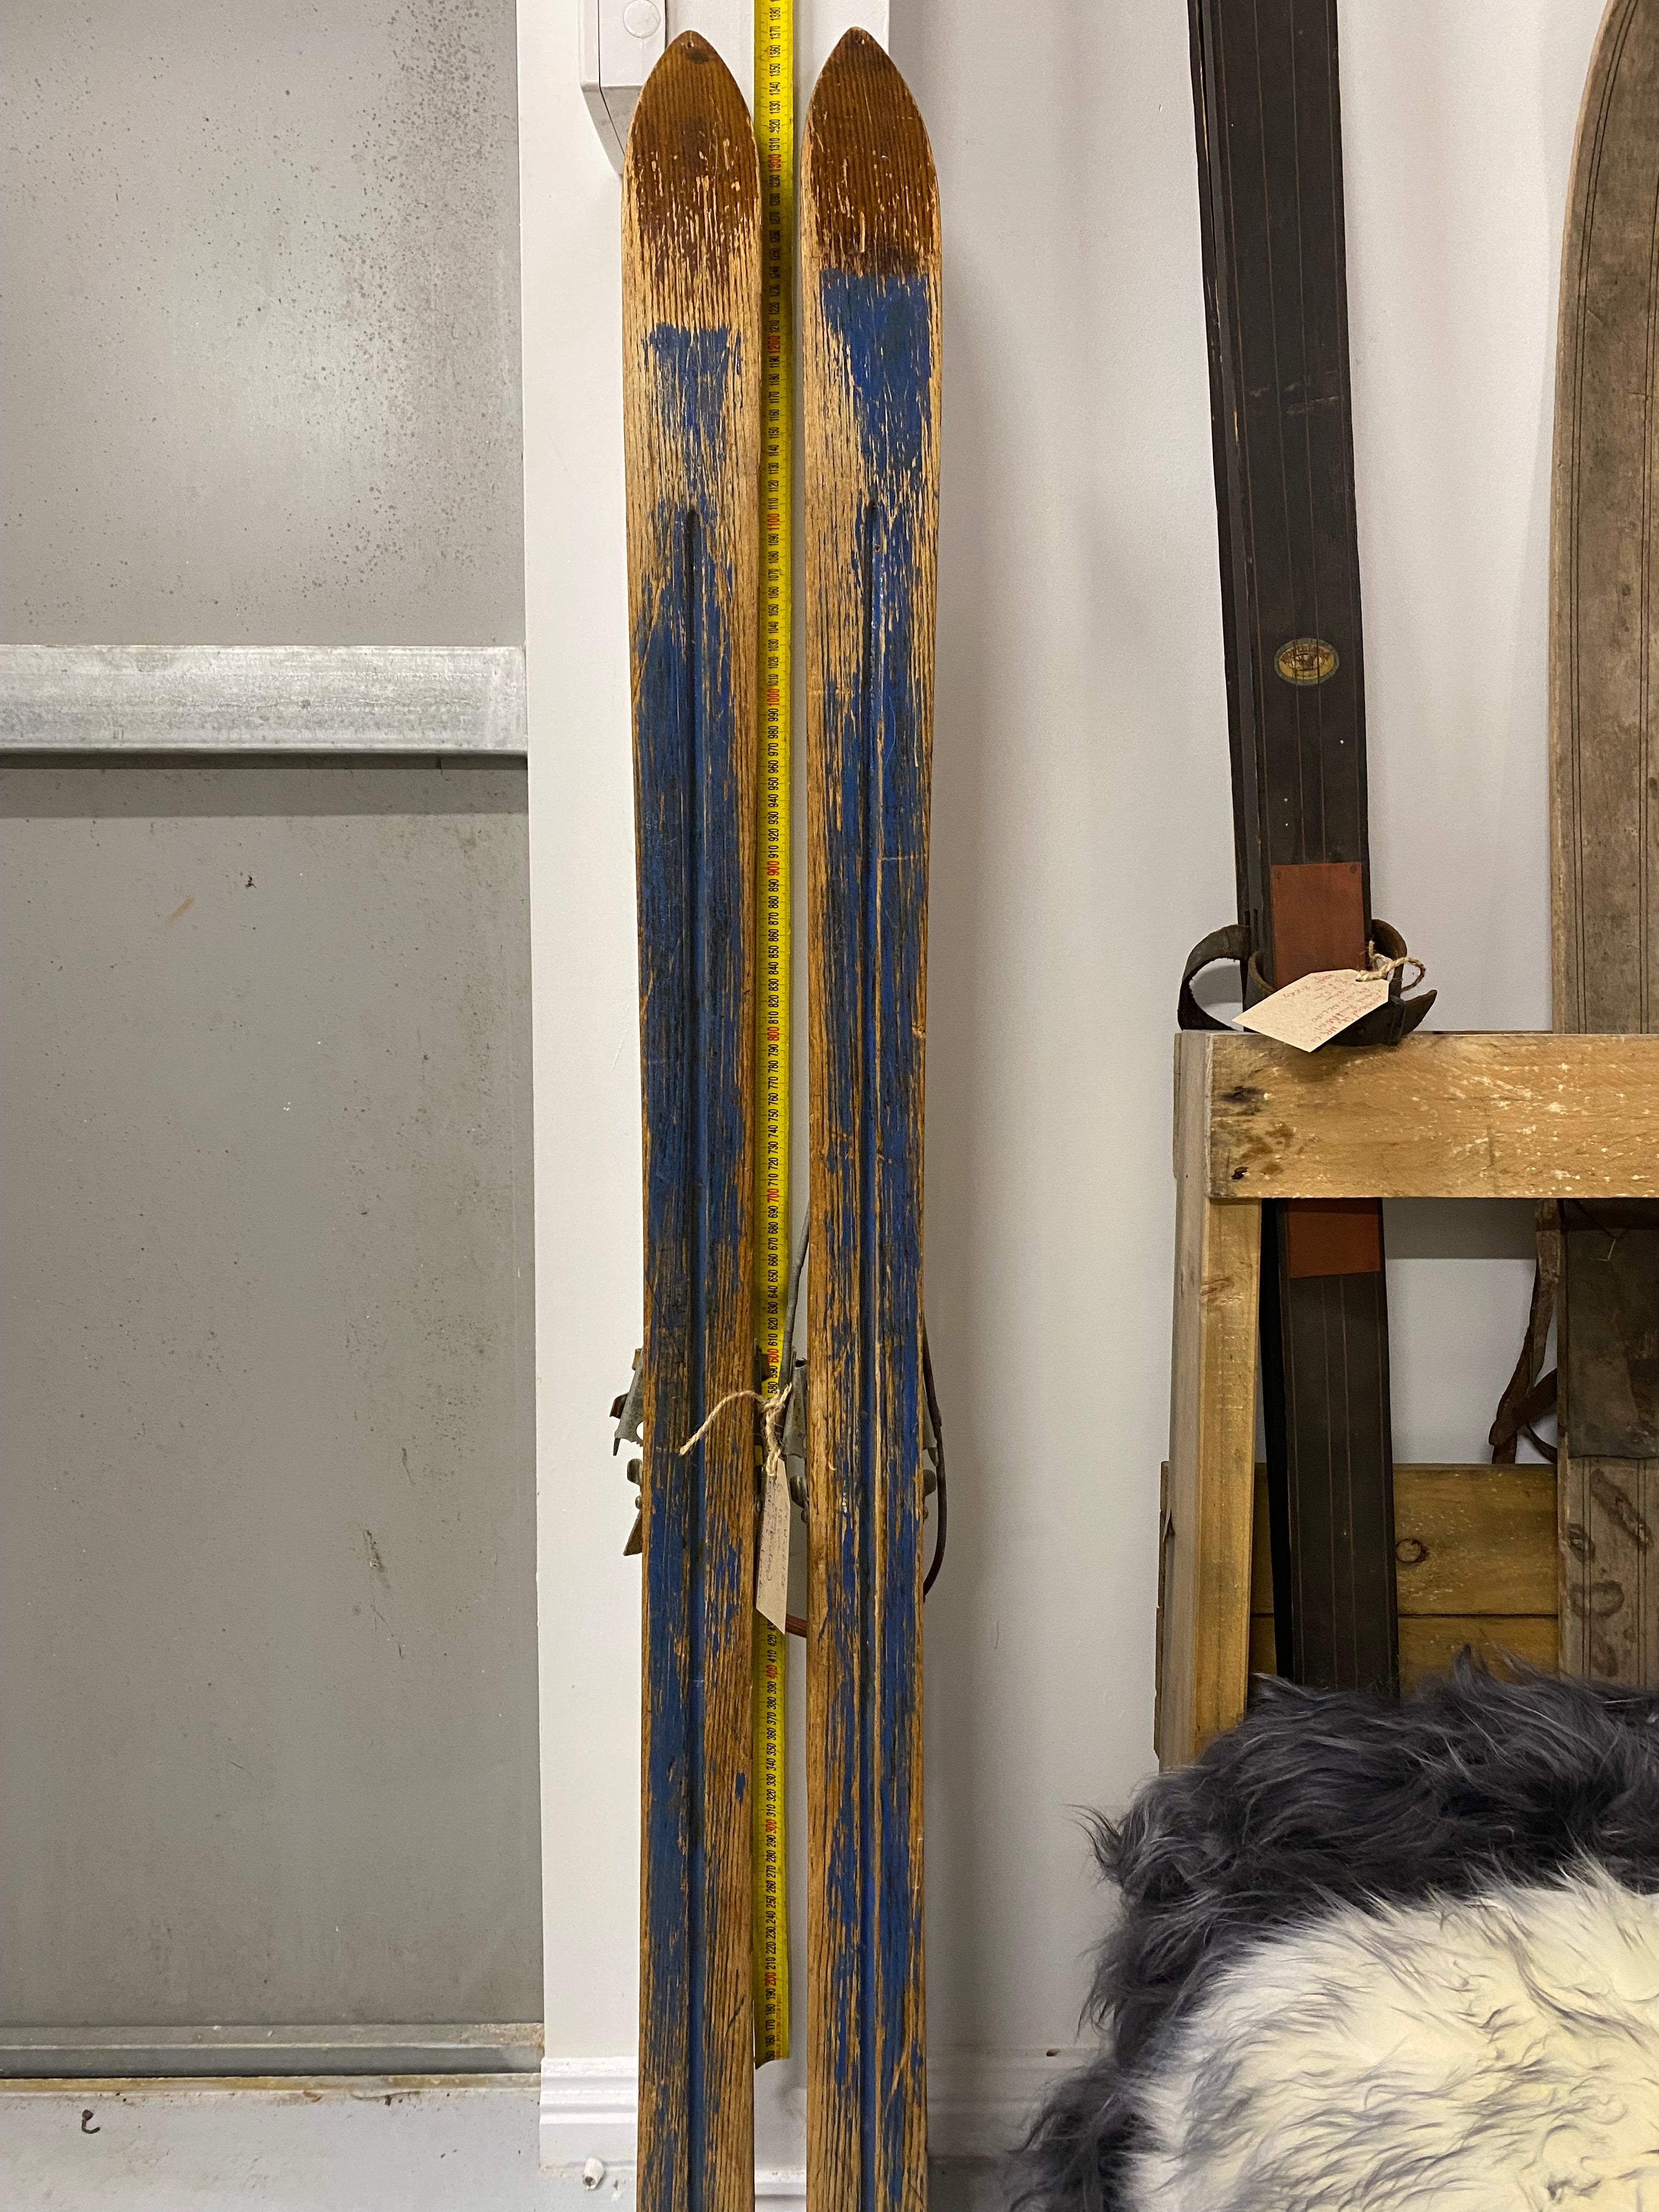 Full Height bases view: unbranded vintage wooden skis with partially painted blue bases. leaning against white painted wall with yellow measuring tape. On the right hand side are a number of stacked vintage skis.